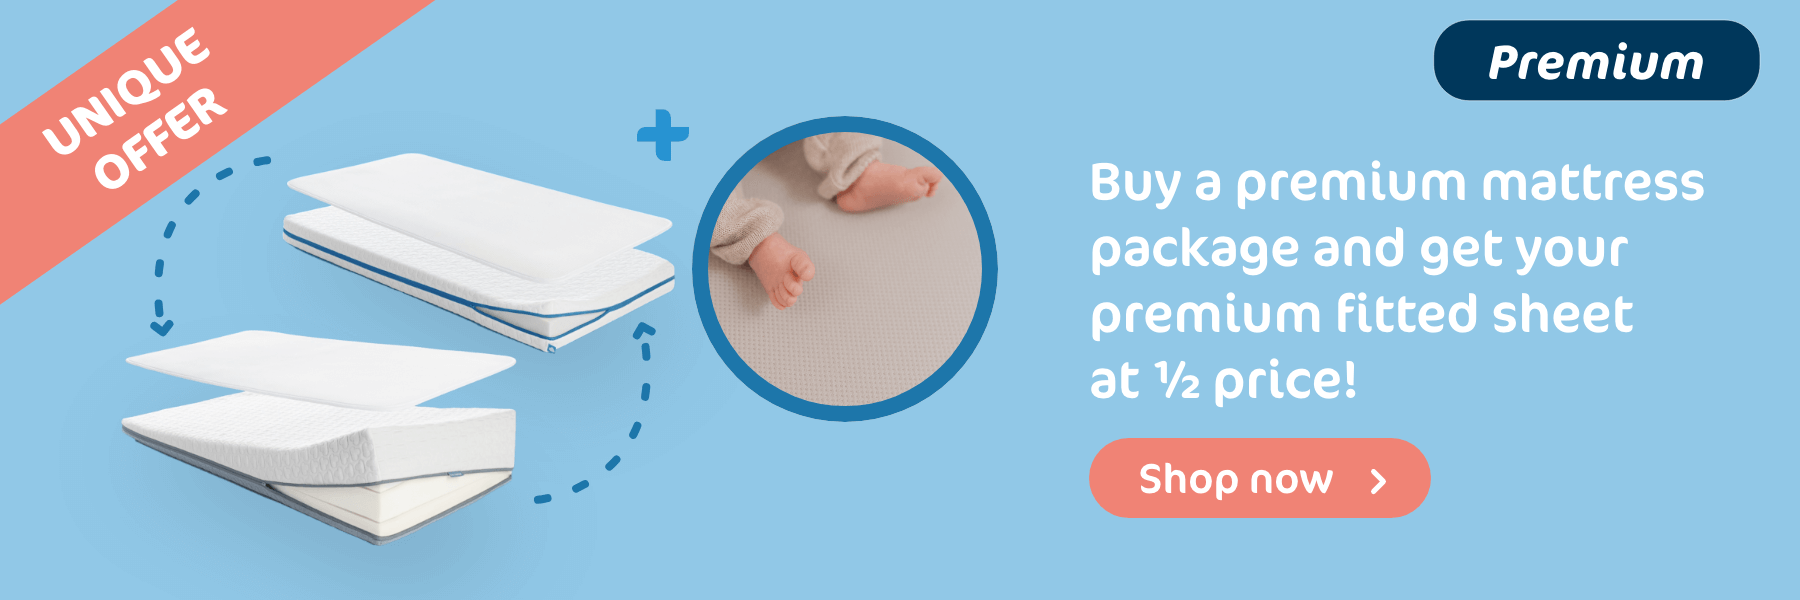 Buy a premium mattress package and get your premium fitted sheet at 1/2 price